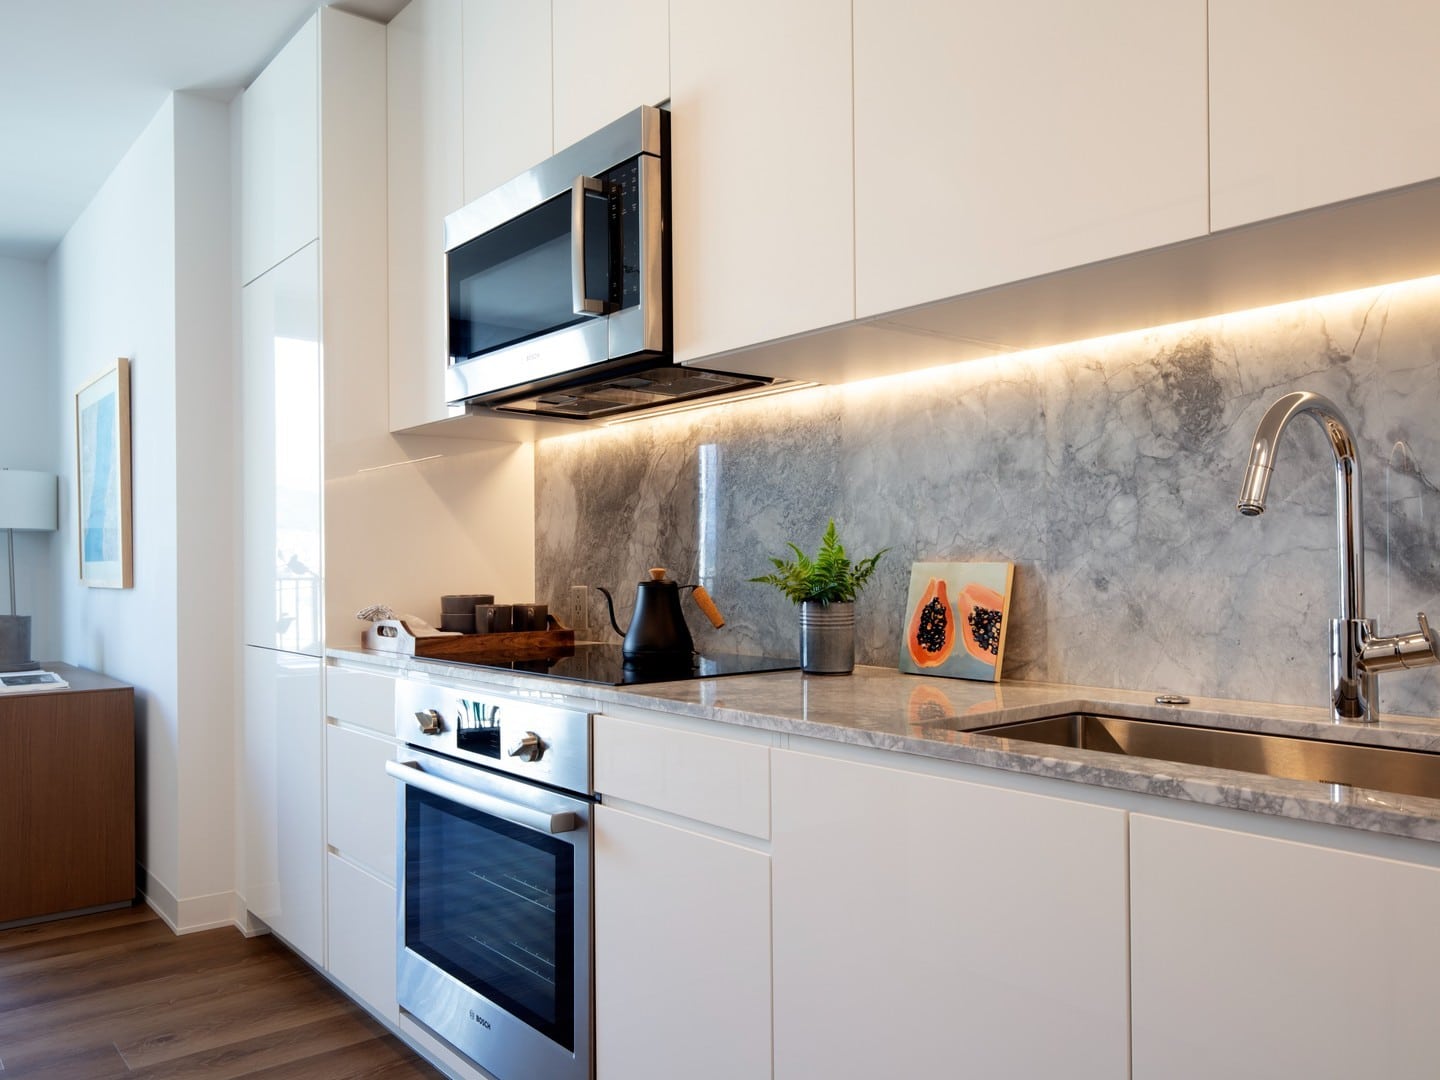 At ʻAʻaliʻi, every detail has been considered. Enjoy well-curated kitchens featuring Bosch appliances, full-height kitchen cabinets and natural stone countertops, designed to enhance your every day. Learn more about these modern move-in ready residences at www.aaliiwardvillage.com.